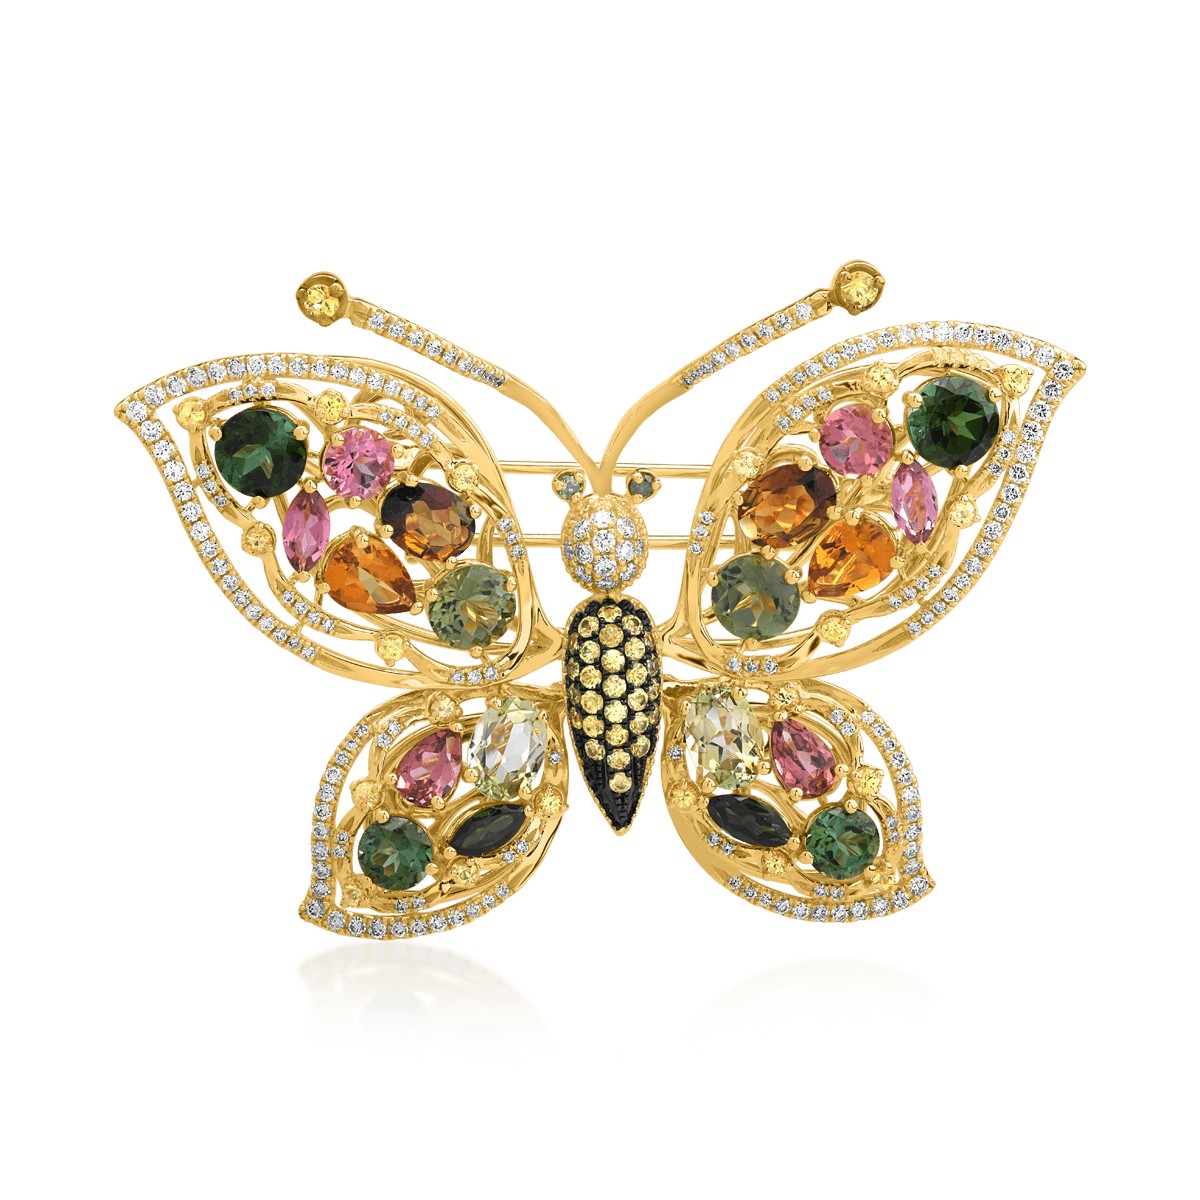 18K yellow gold brooch with 12.76ct precious and semi-precious stones